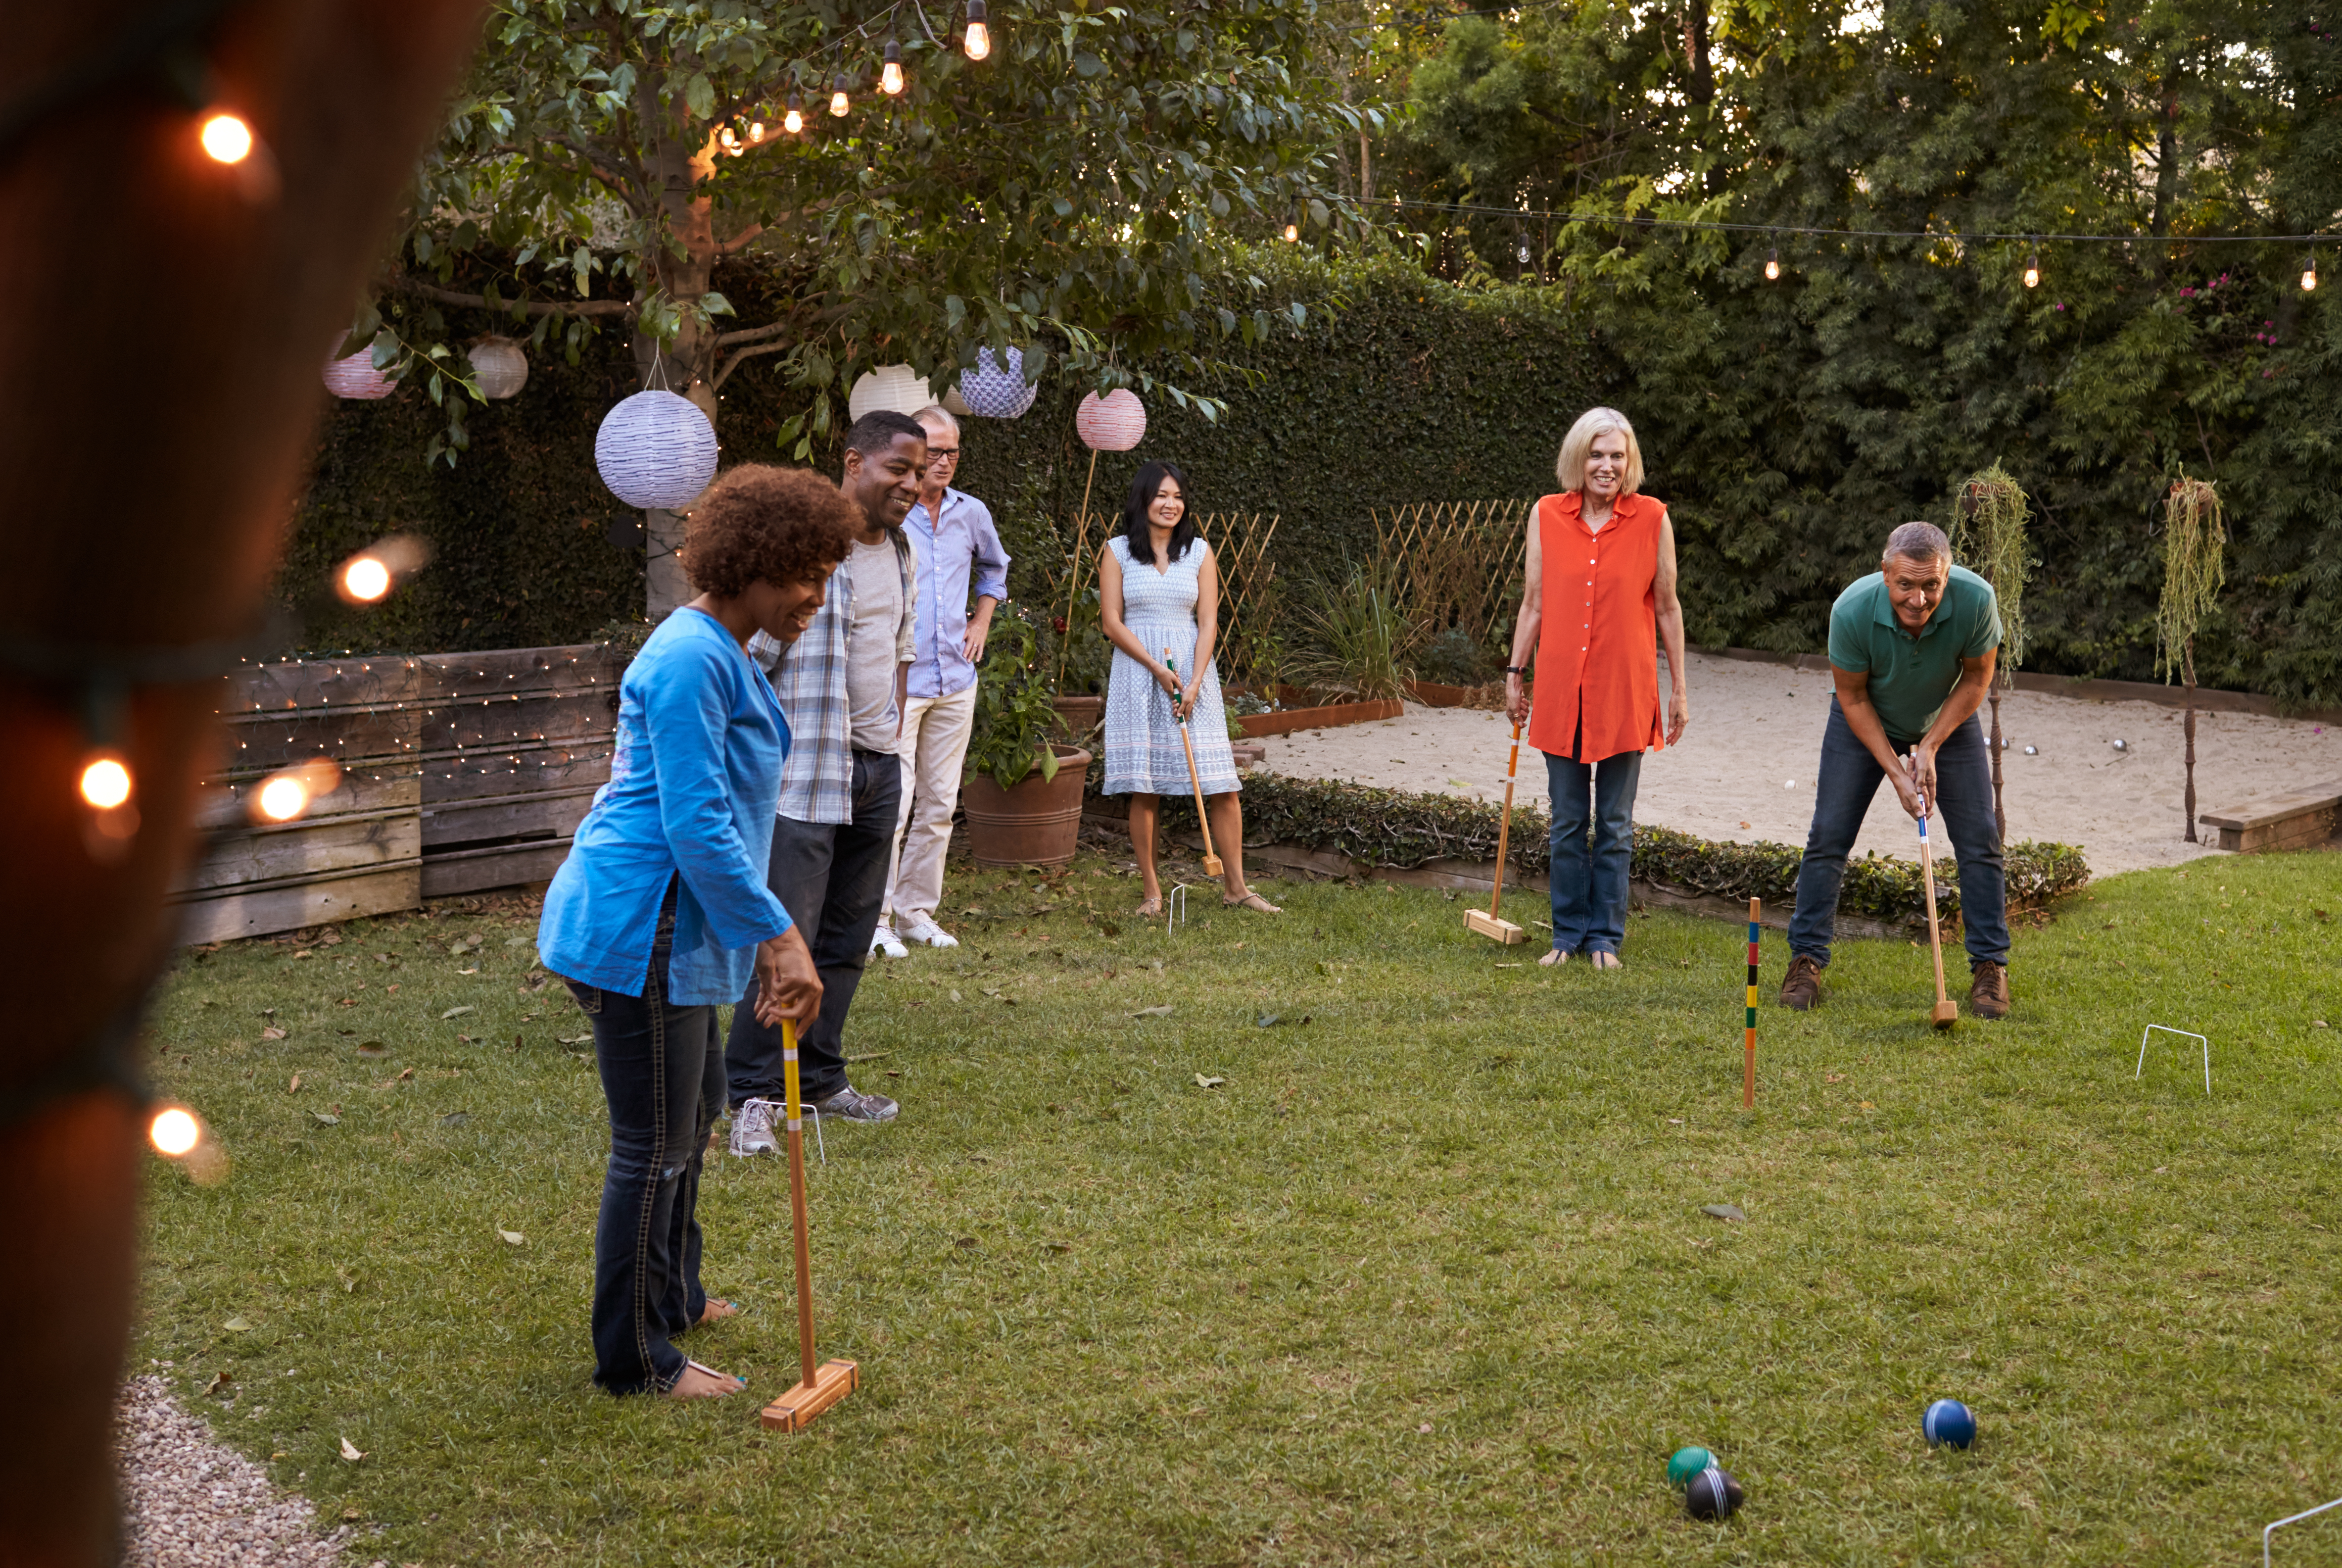 People playing croquet together